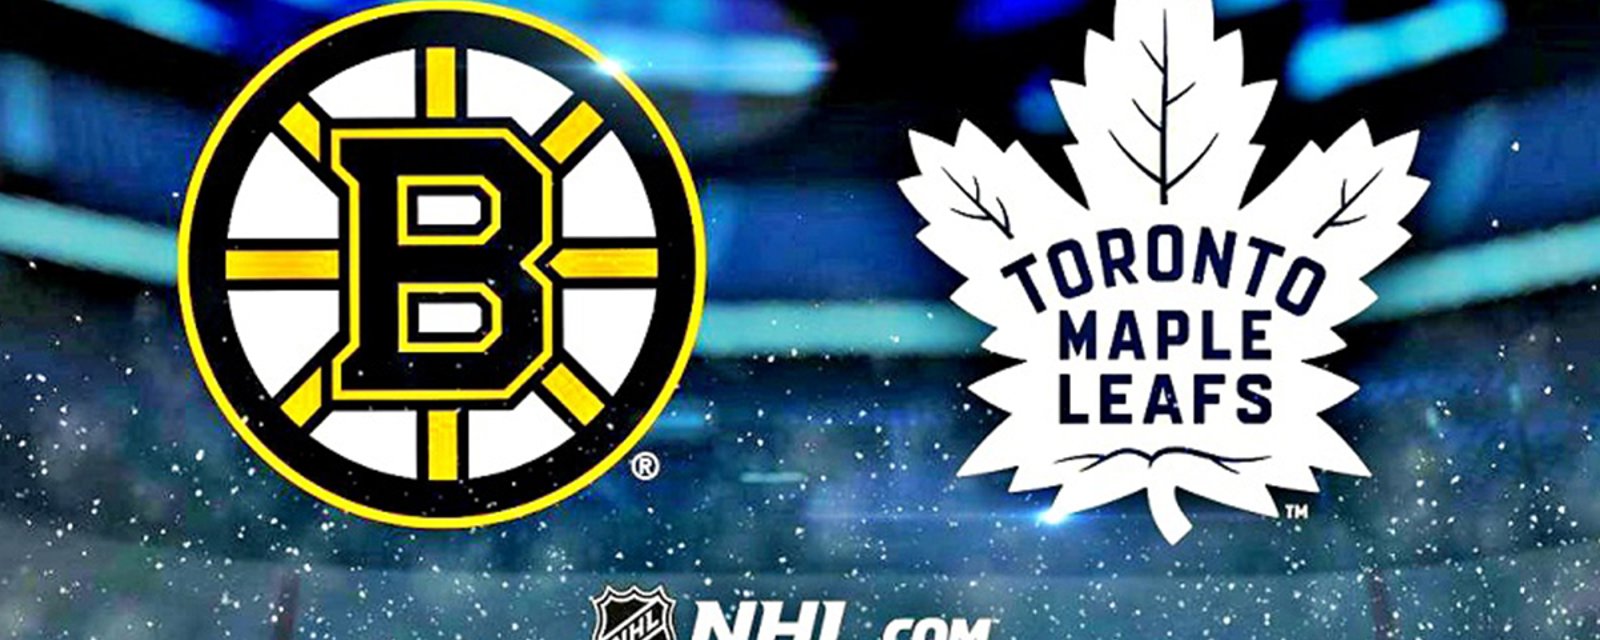 Report: NHL veteran declined contract offers from both Bruins and Leafs